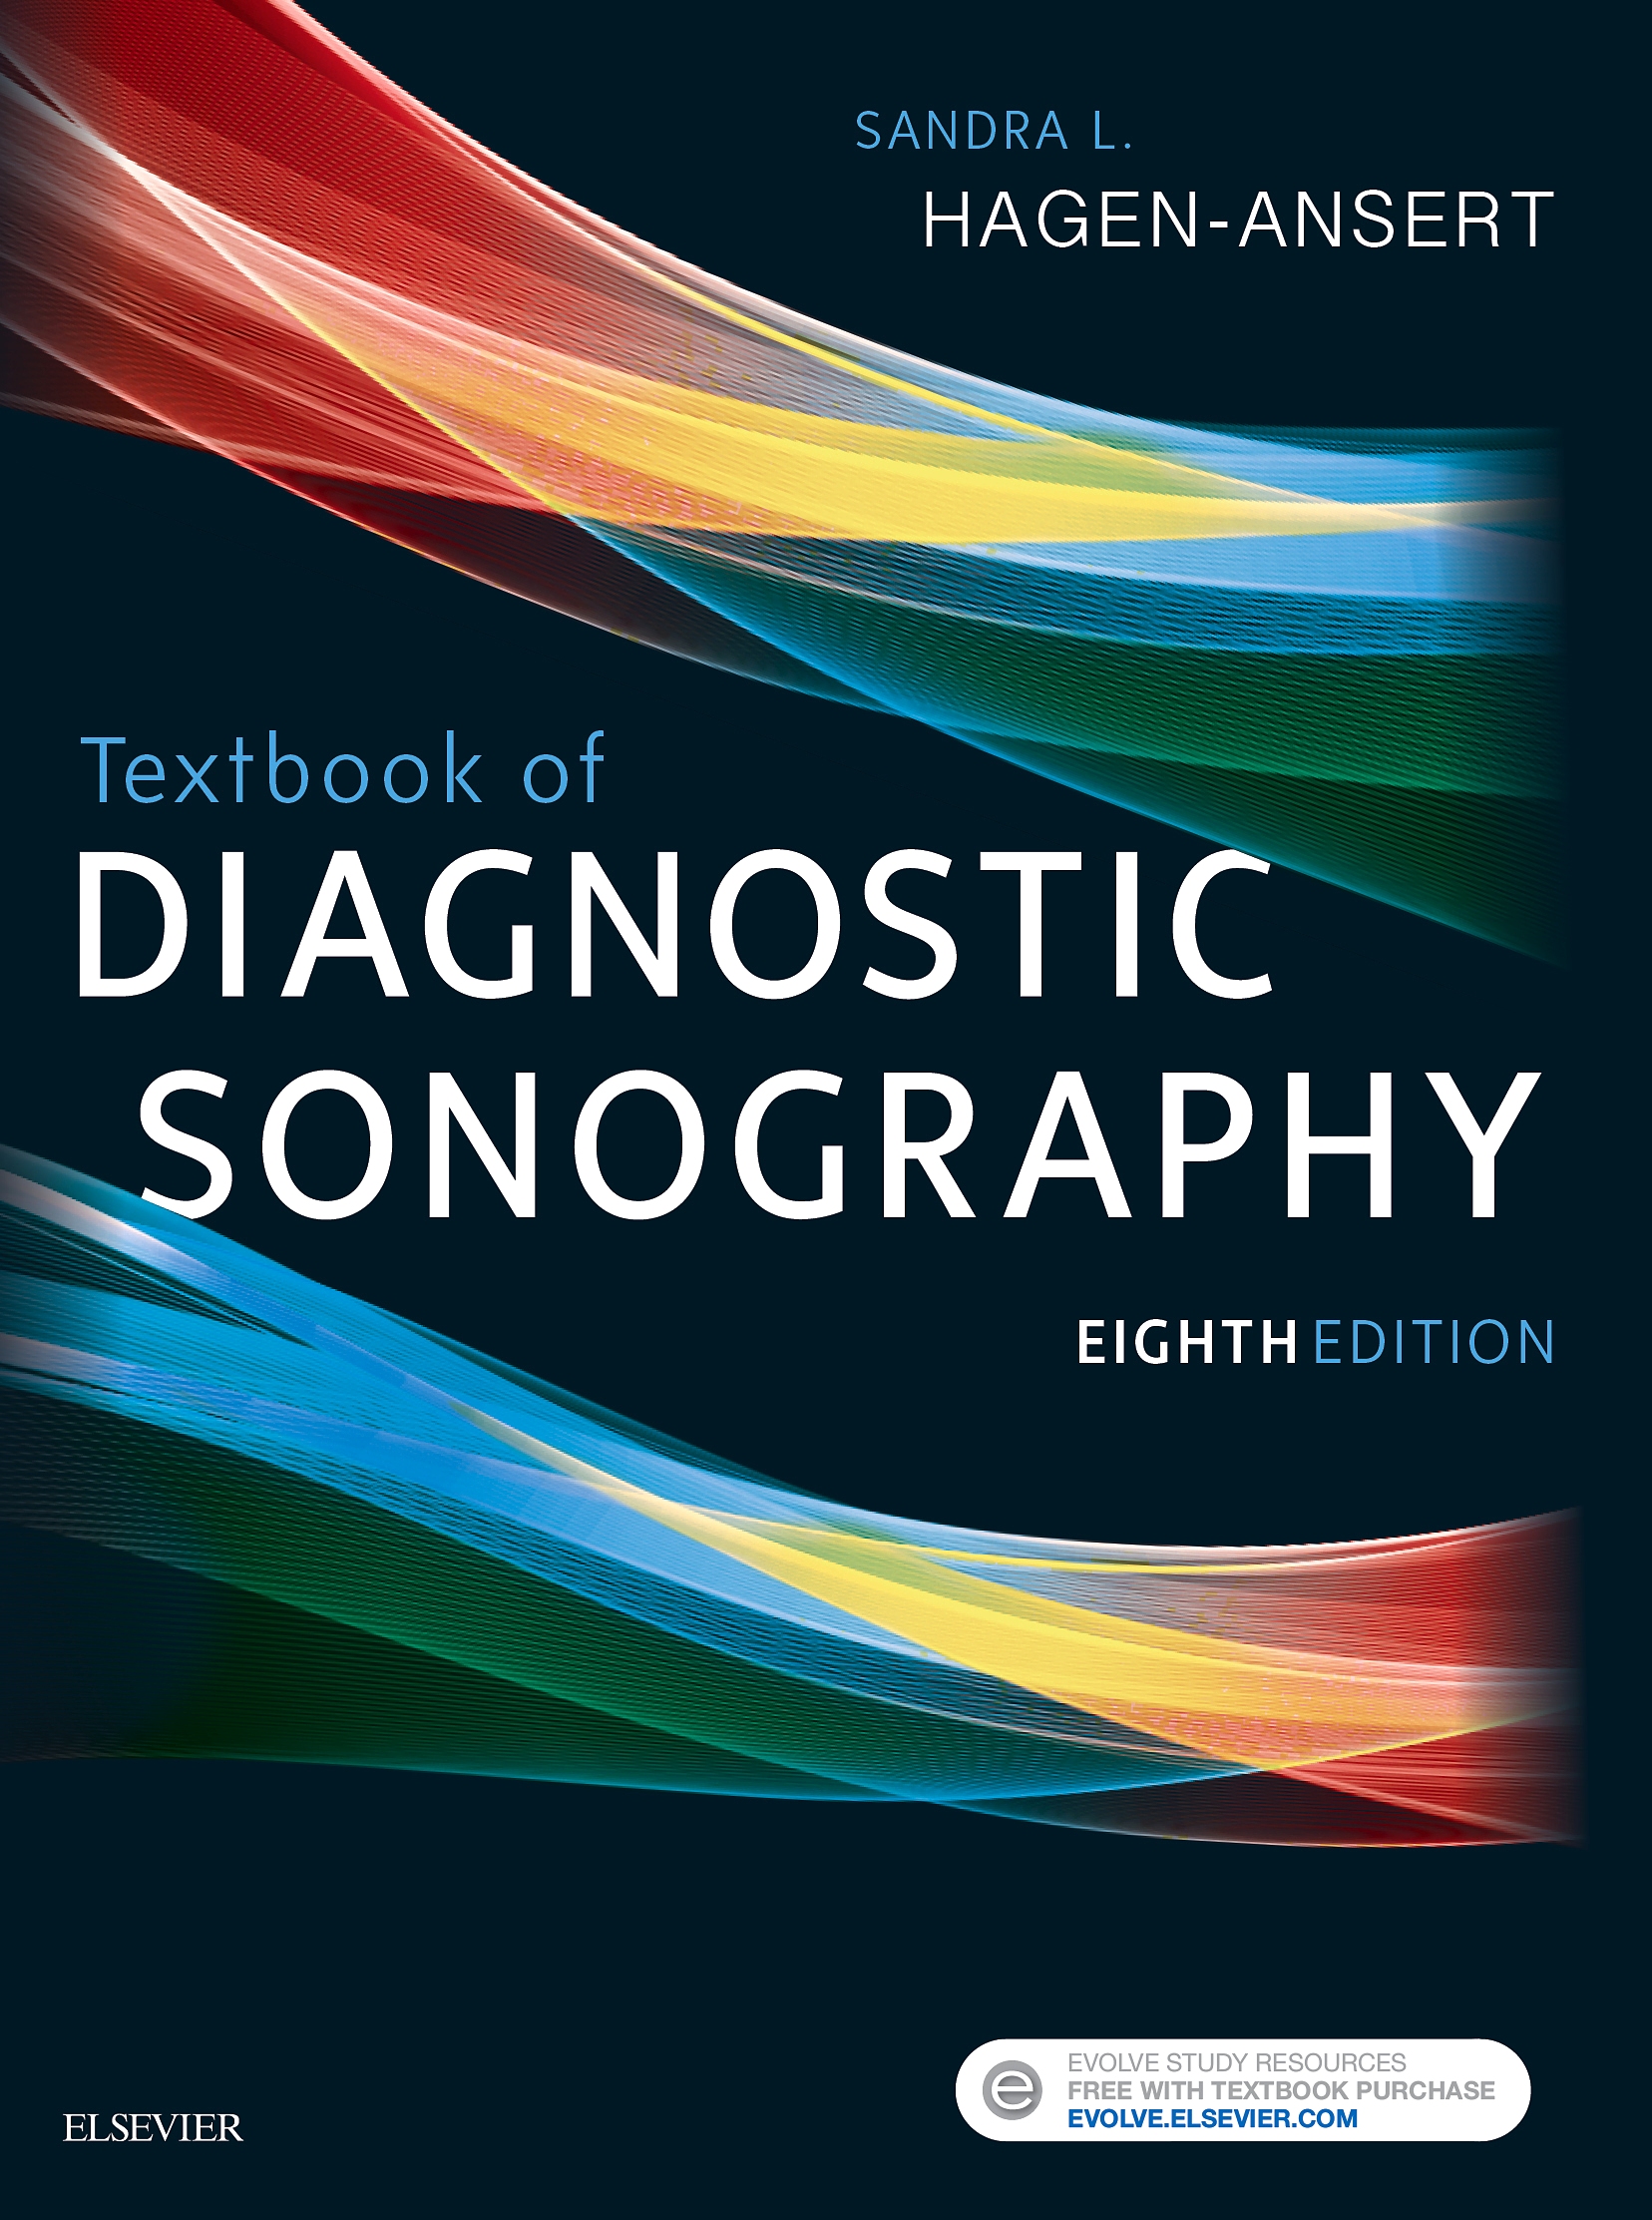 Evolve Resources for Textbook of Diagnostic Sonography, 8th Edition